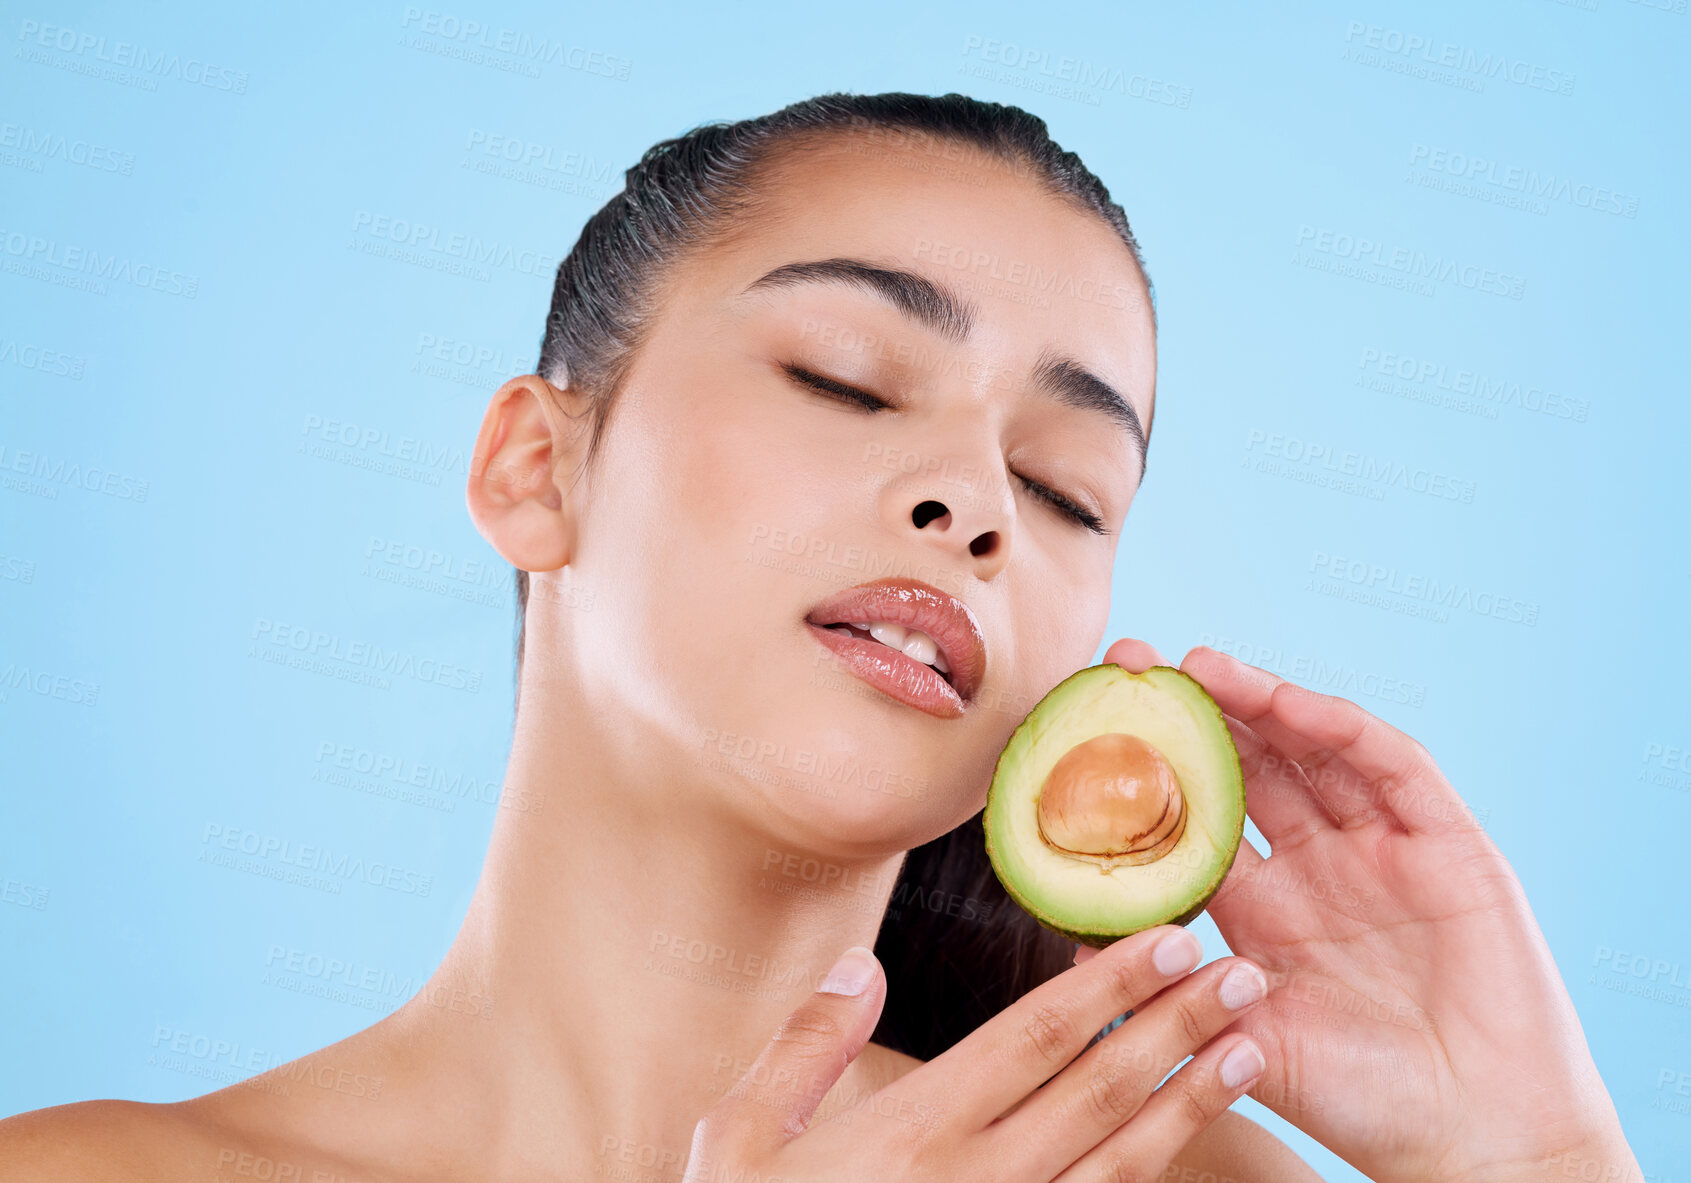 Buy stock photo Studio shot of an attractive young woman posing with half an avo against a blue background